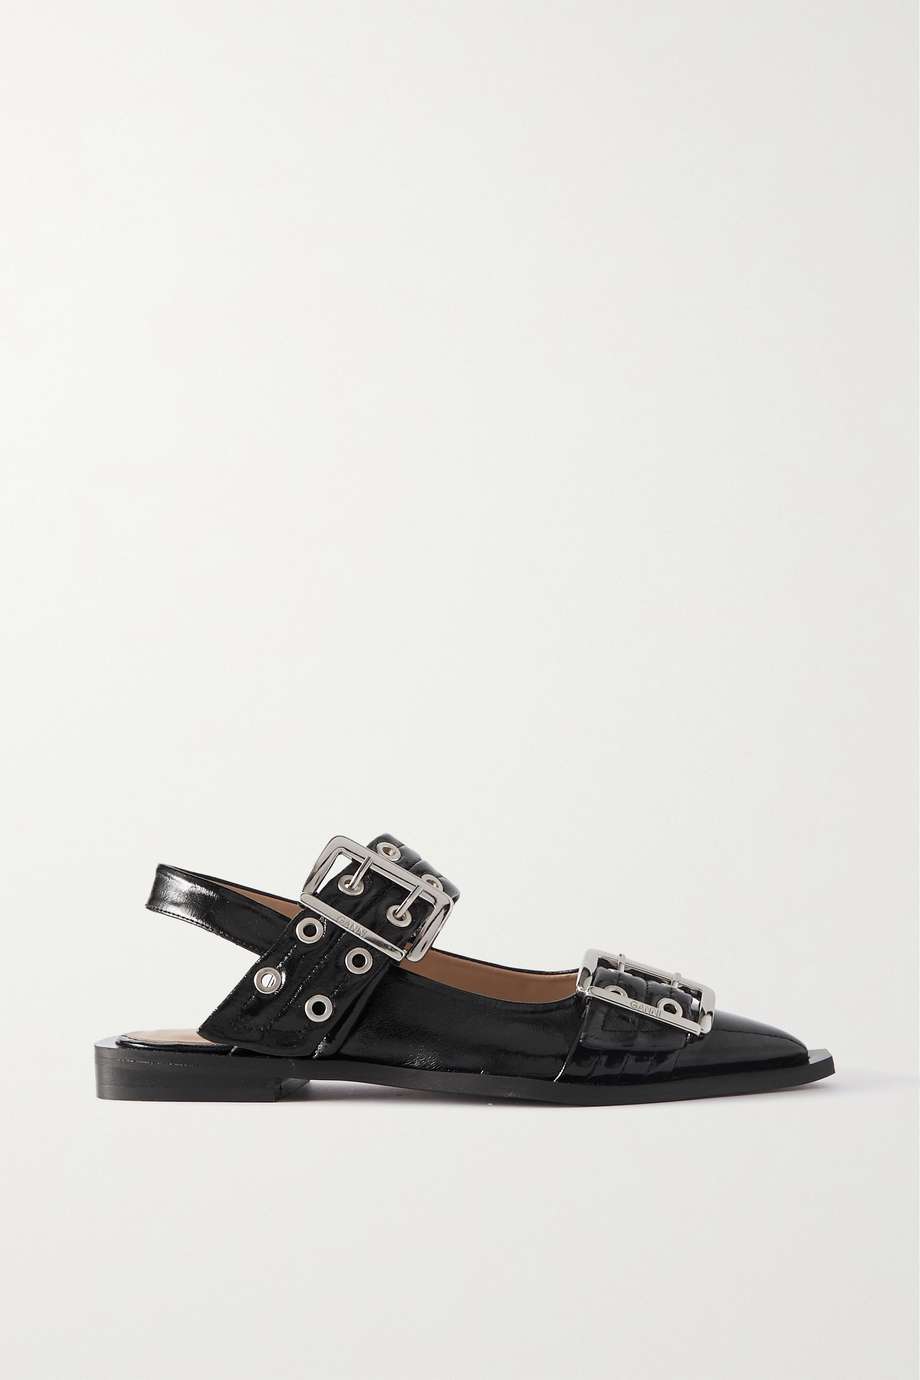 Ganni + Buckled Eyelet-Embellished Recycled Faux Patent-Leather Ballet ...